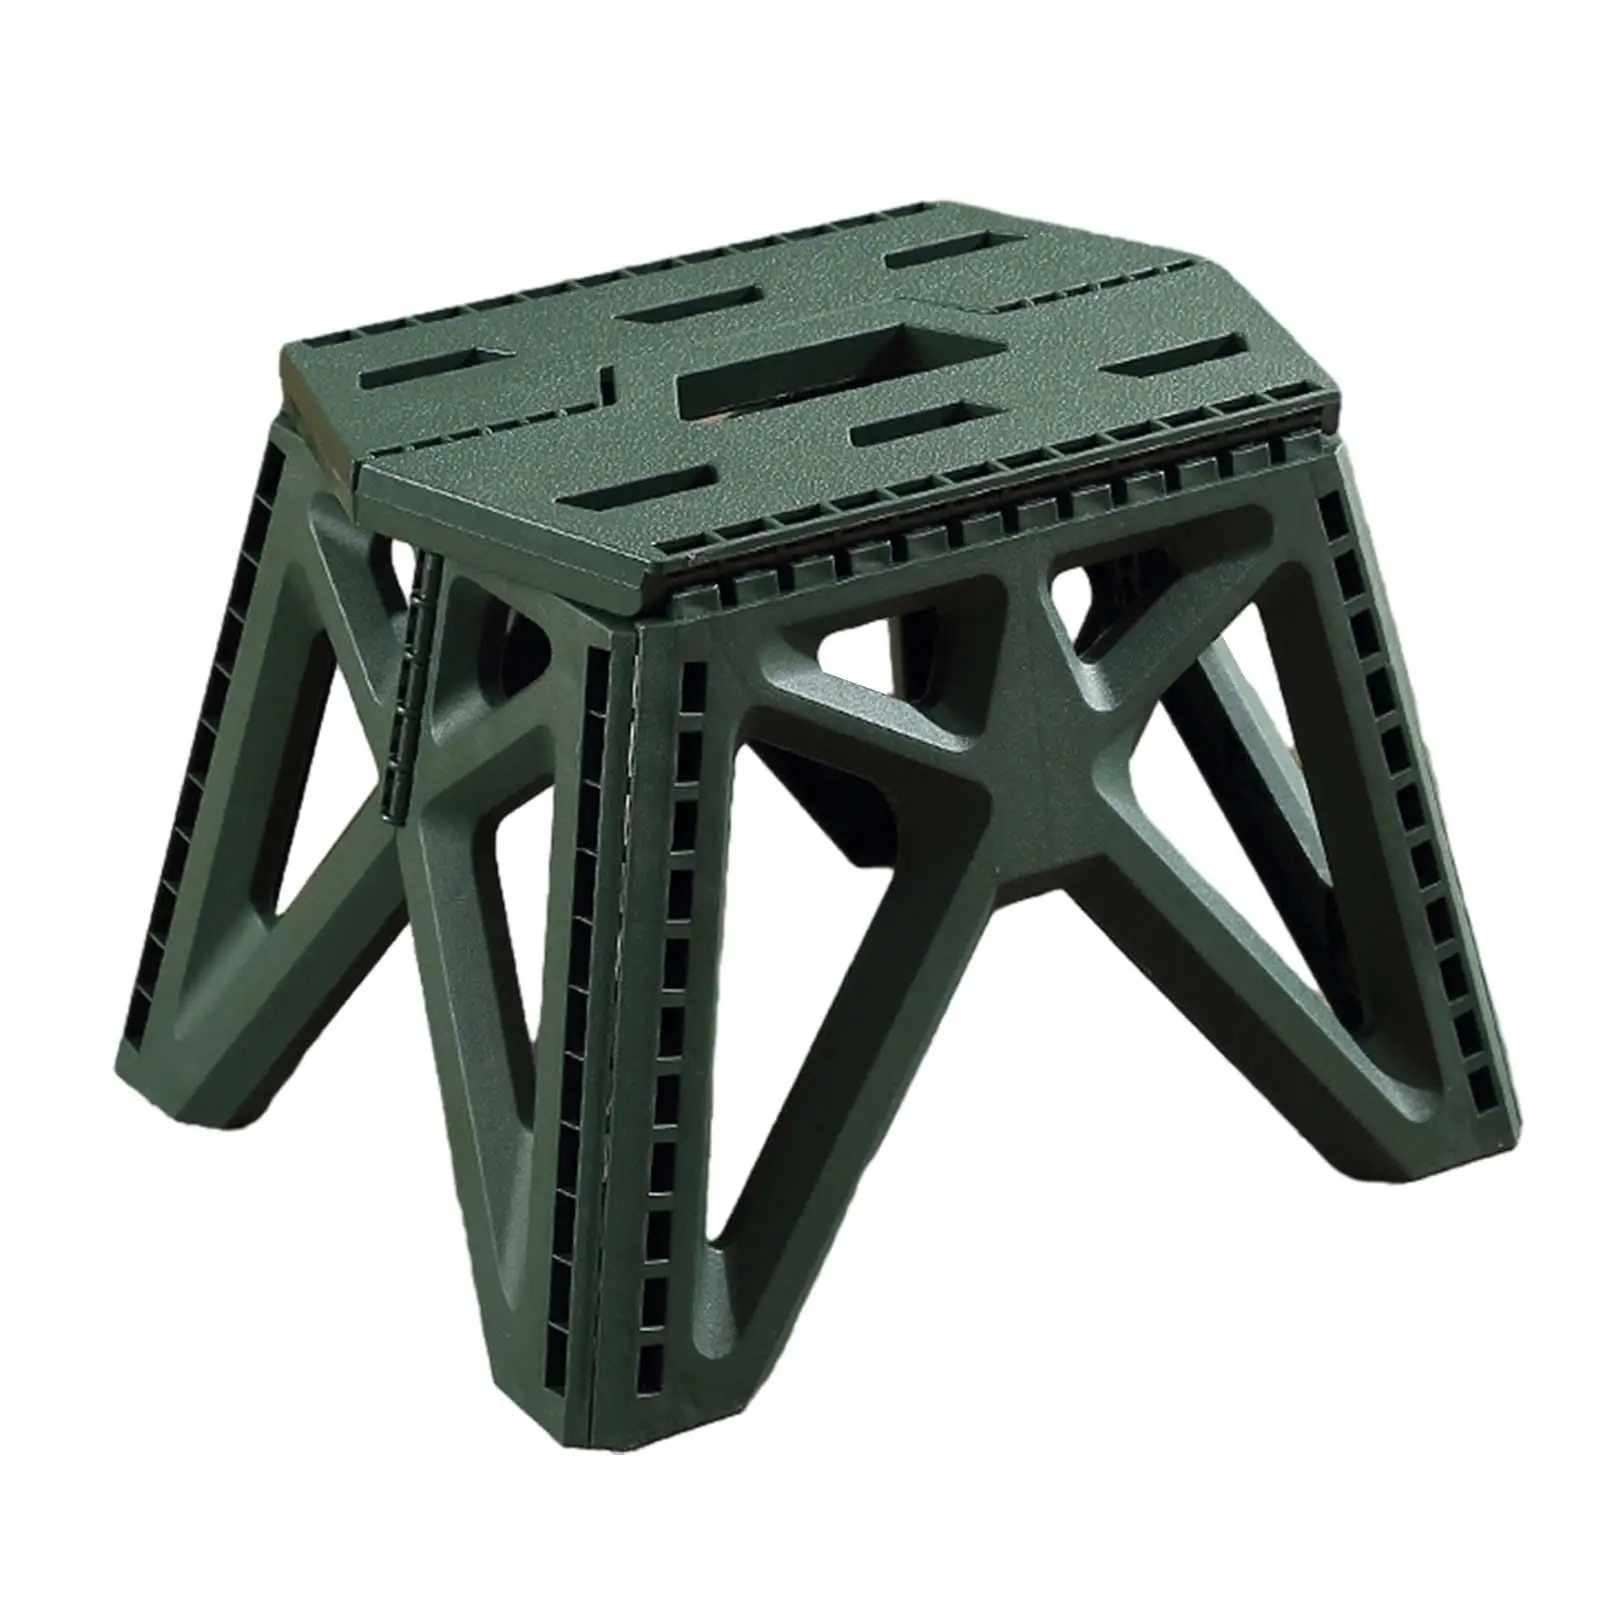 Foldable Camping Stool Portable Collapsible Lightweight Outside Camp Stool Chair for Hiking Backpacking Patio Travel Picnic